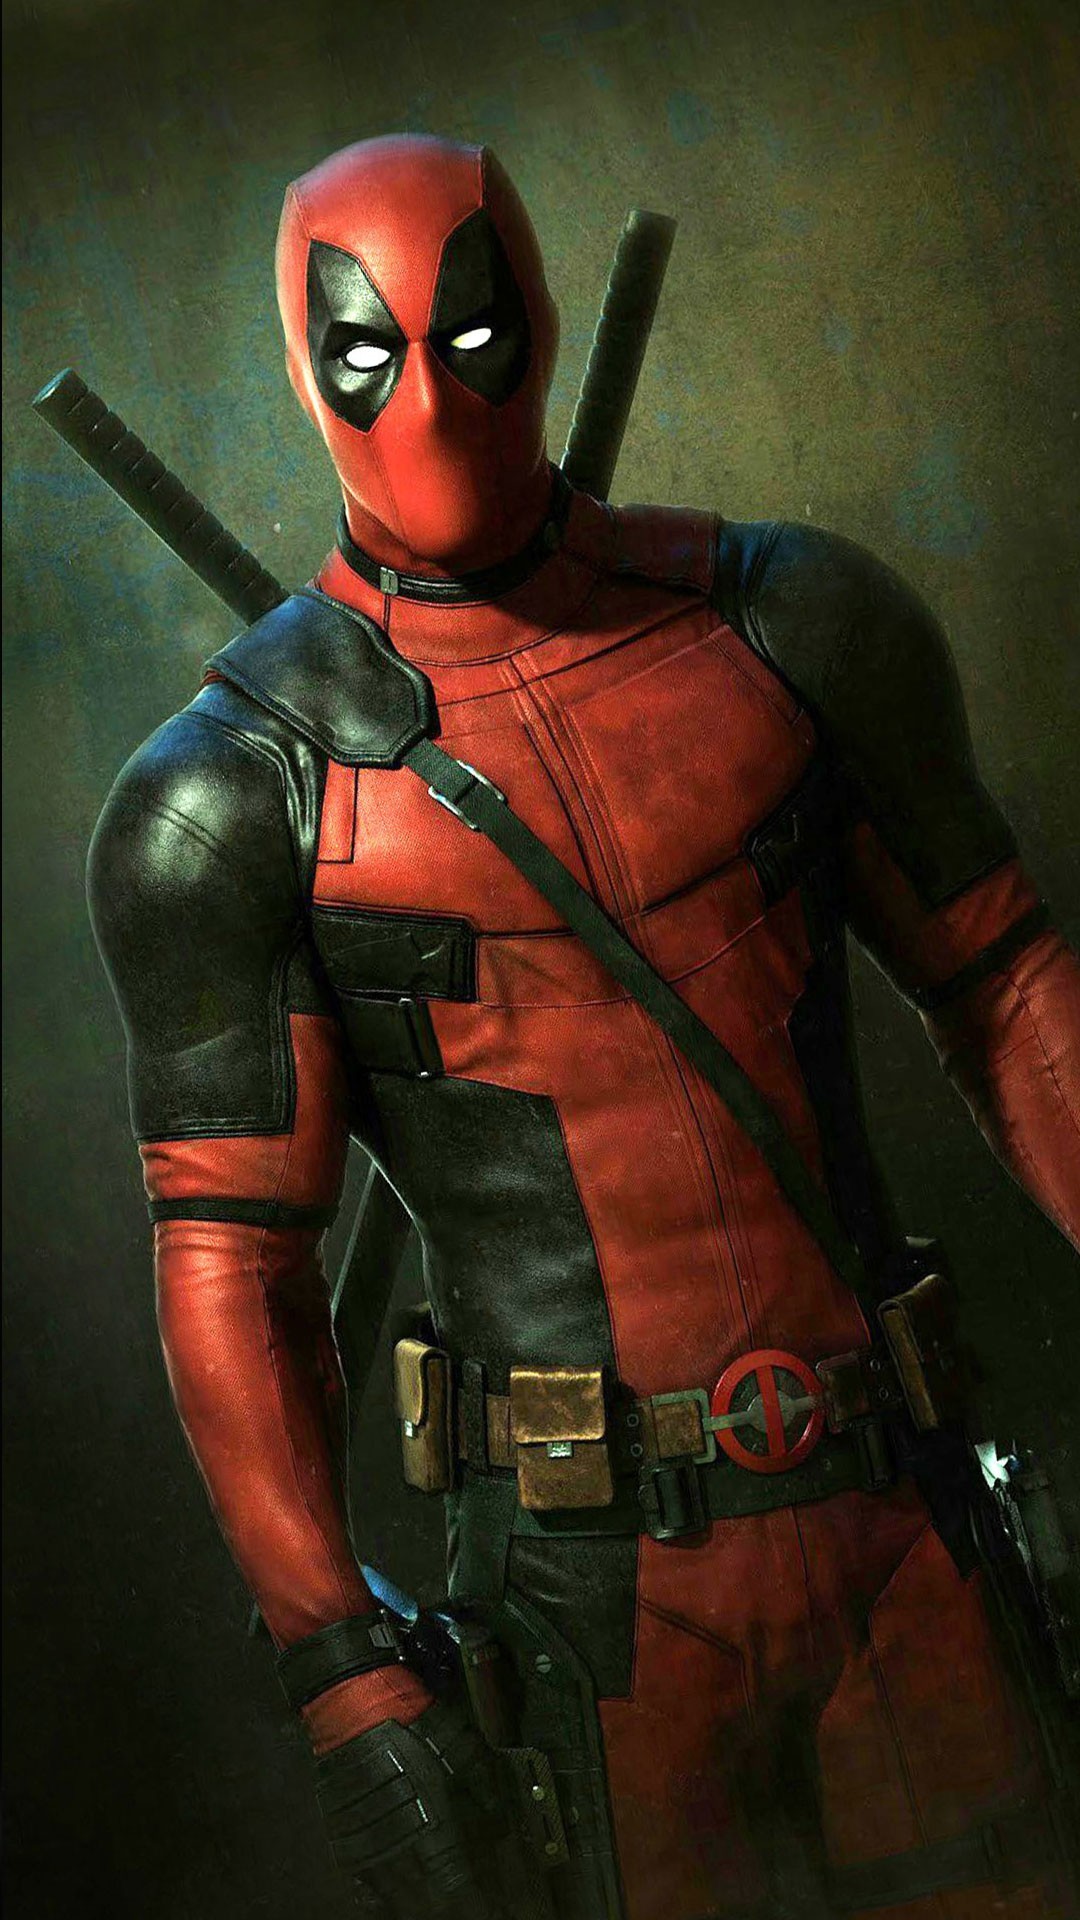 Deadpool From The Movie Deadpool Hd Wallpaper For Iphone 7